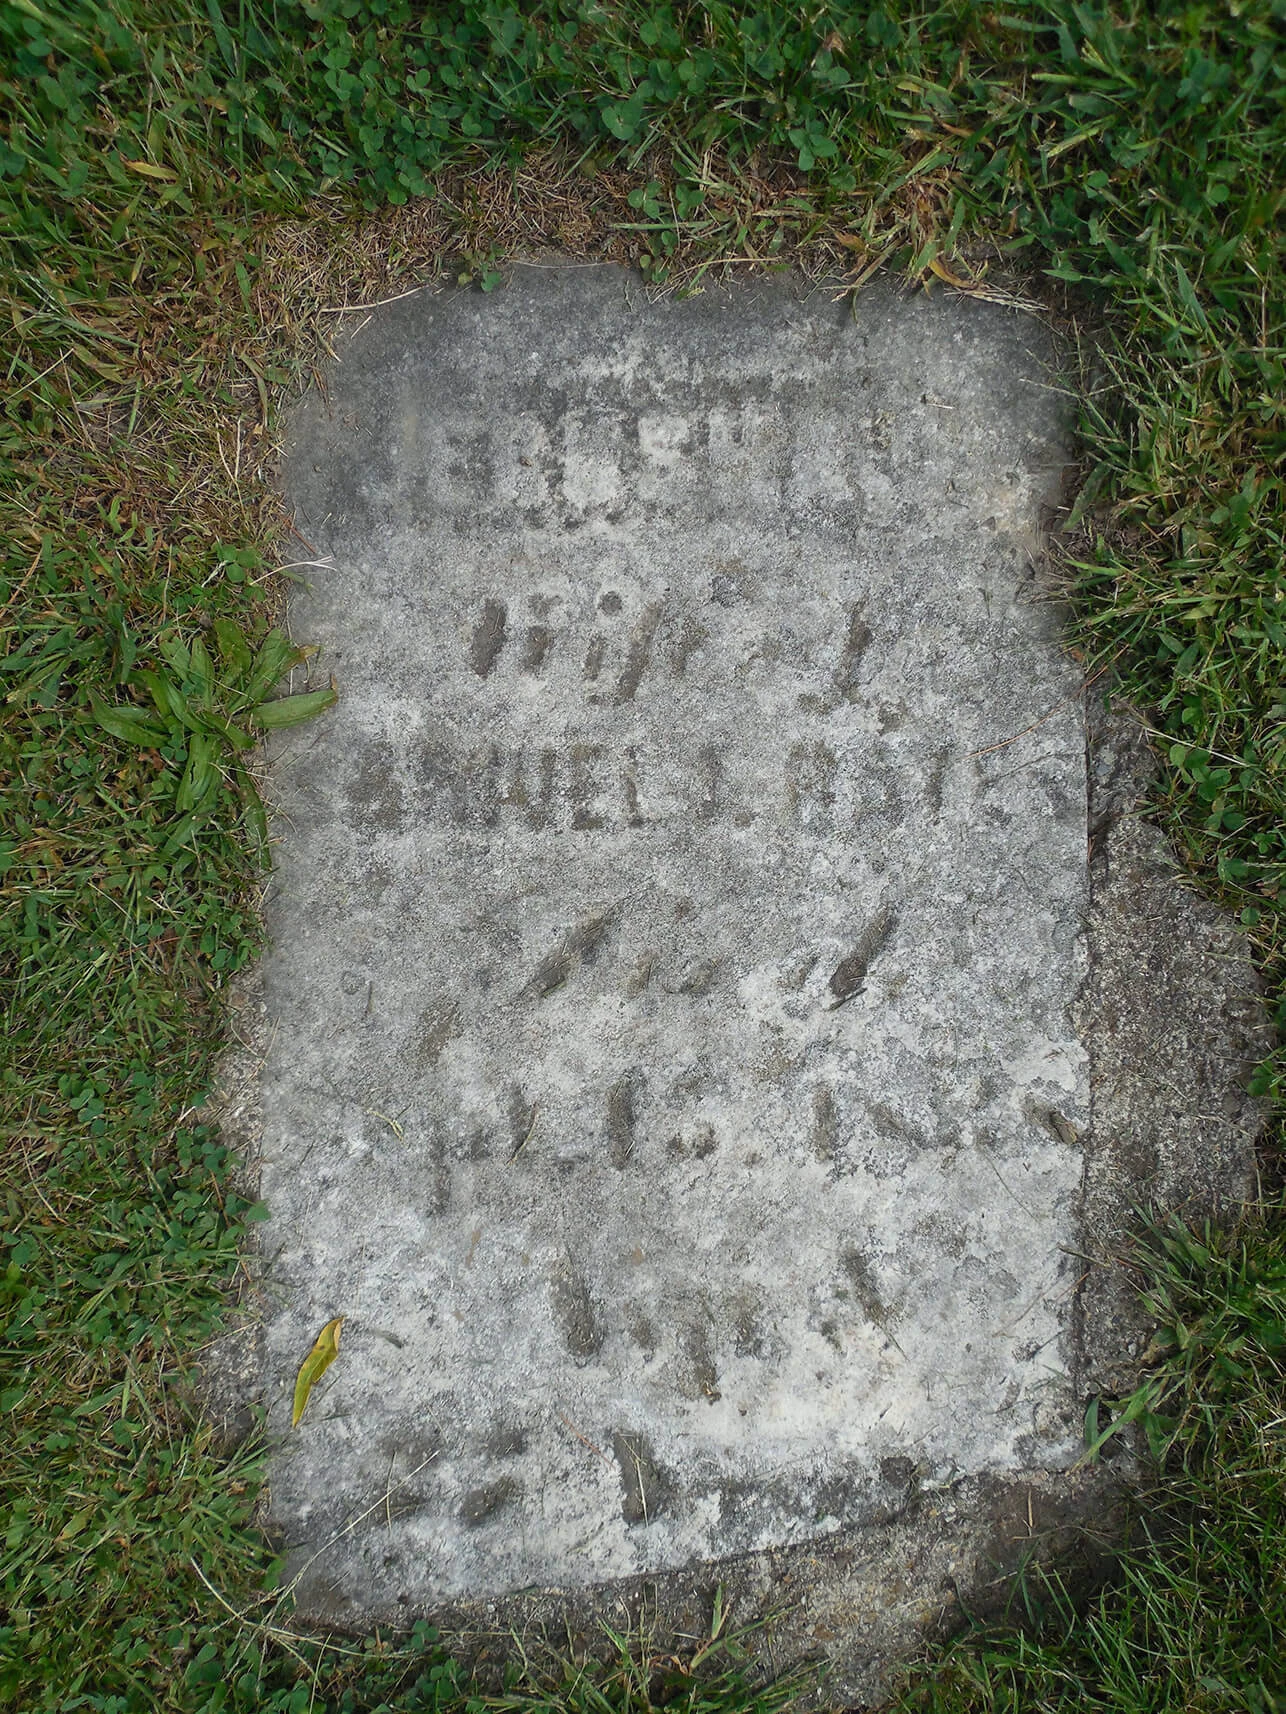 Flat gravestone surrounded by mowed grass.